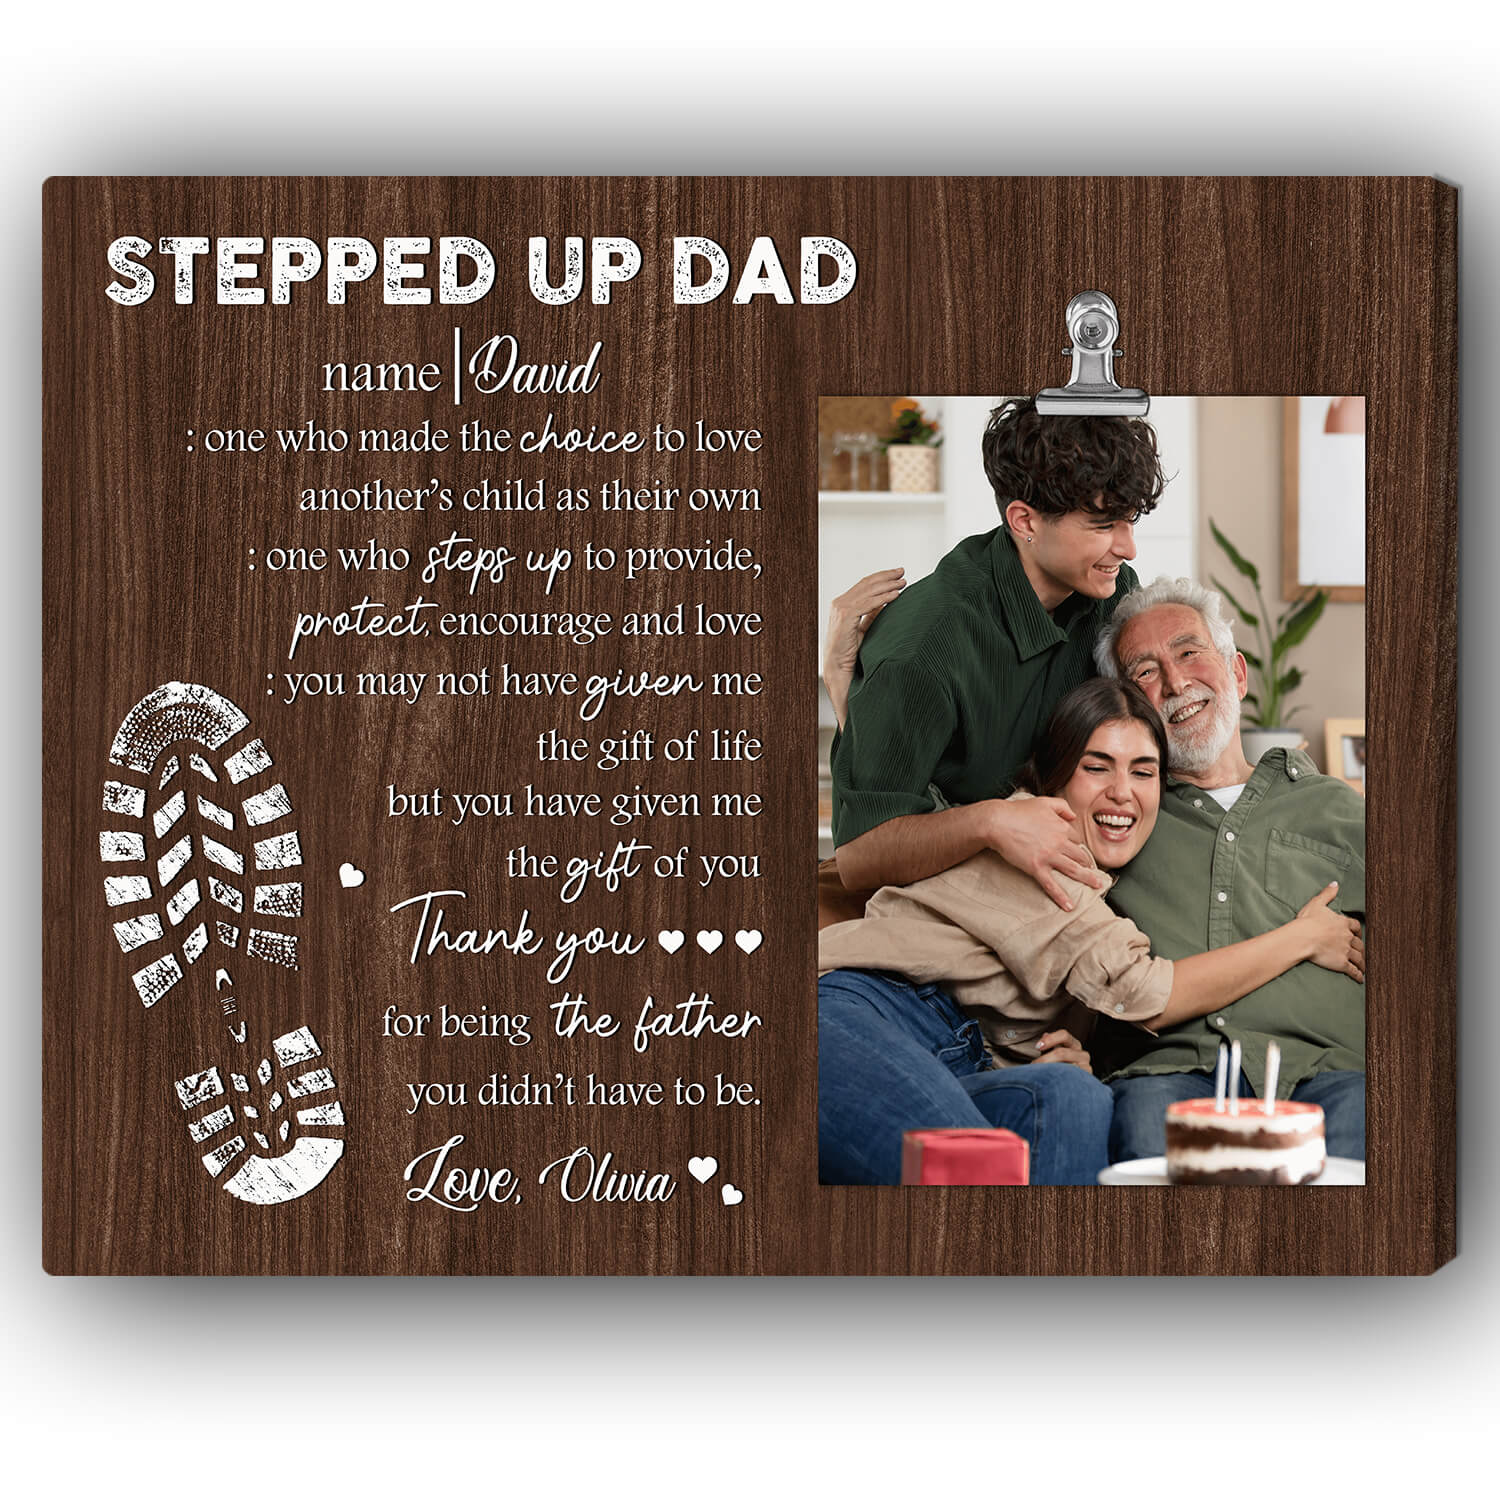 Stepped up Dad - Personalized Father's Day or Birthday gift for Step Dad - Custom Canvas Print - MyMindfulGifts